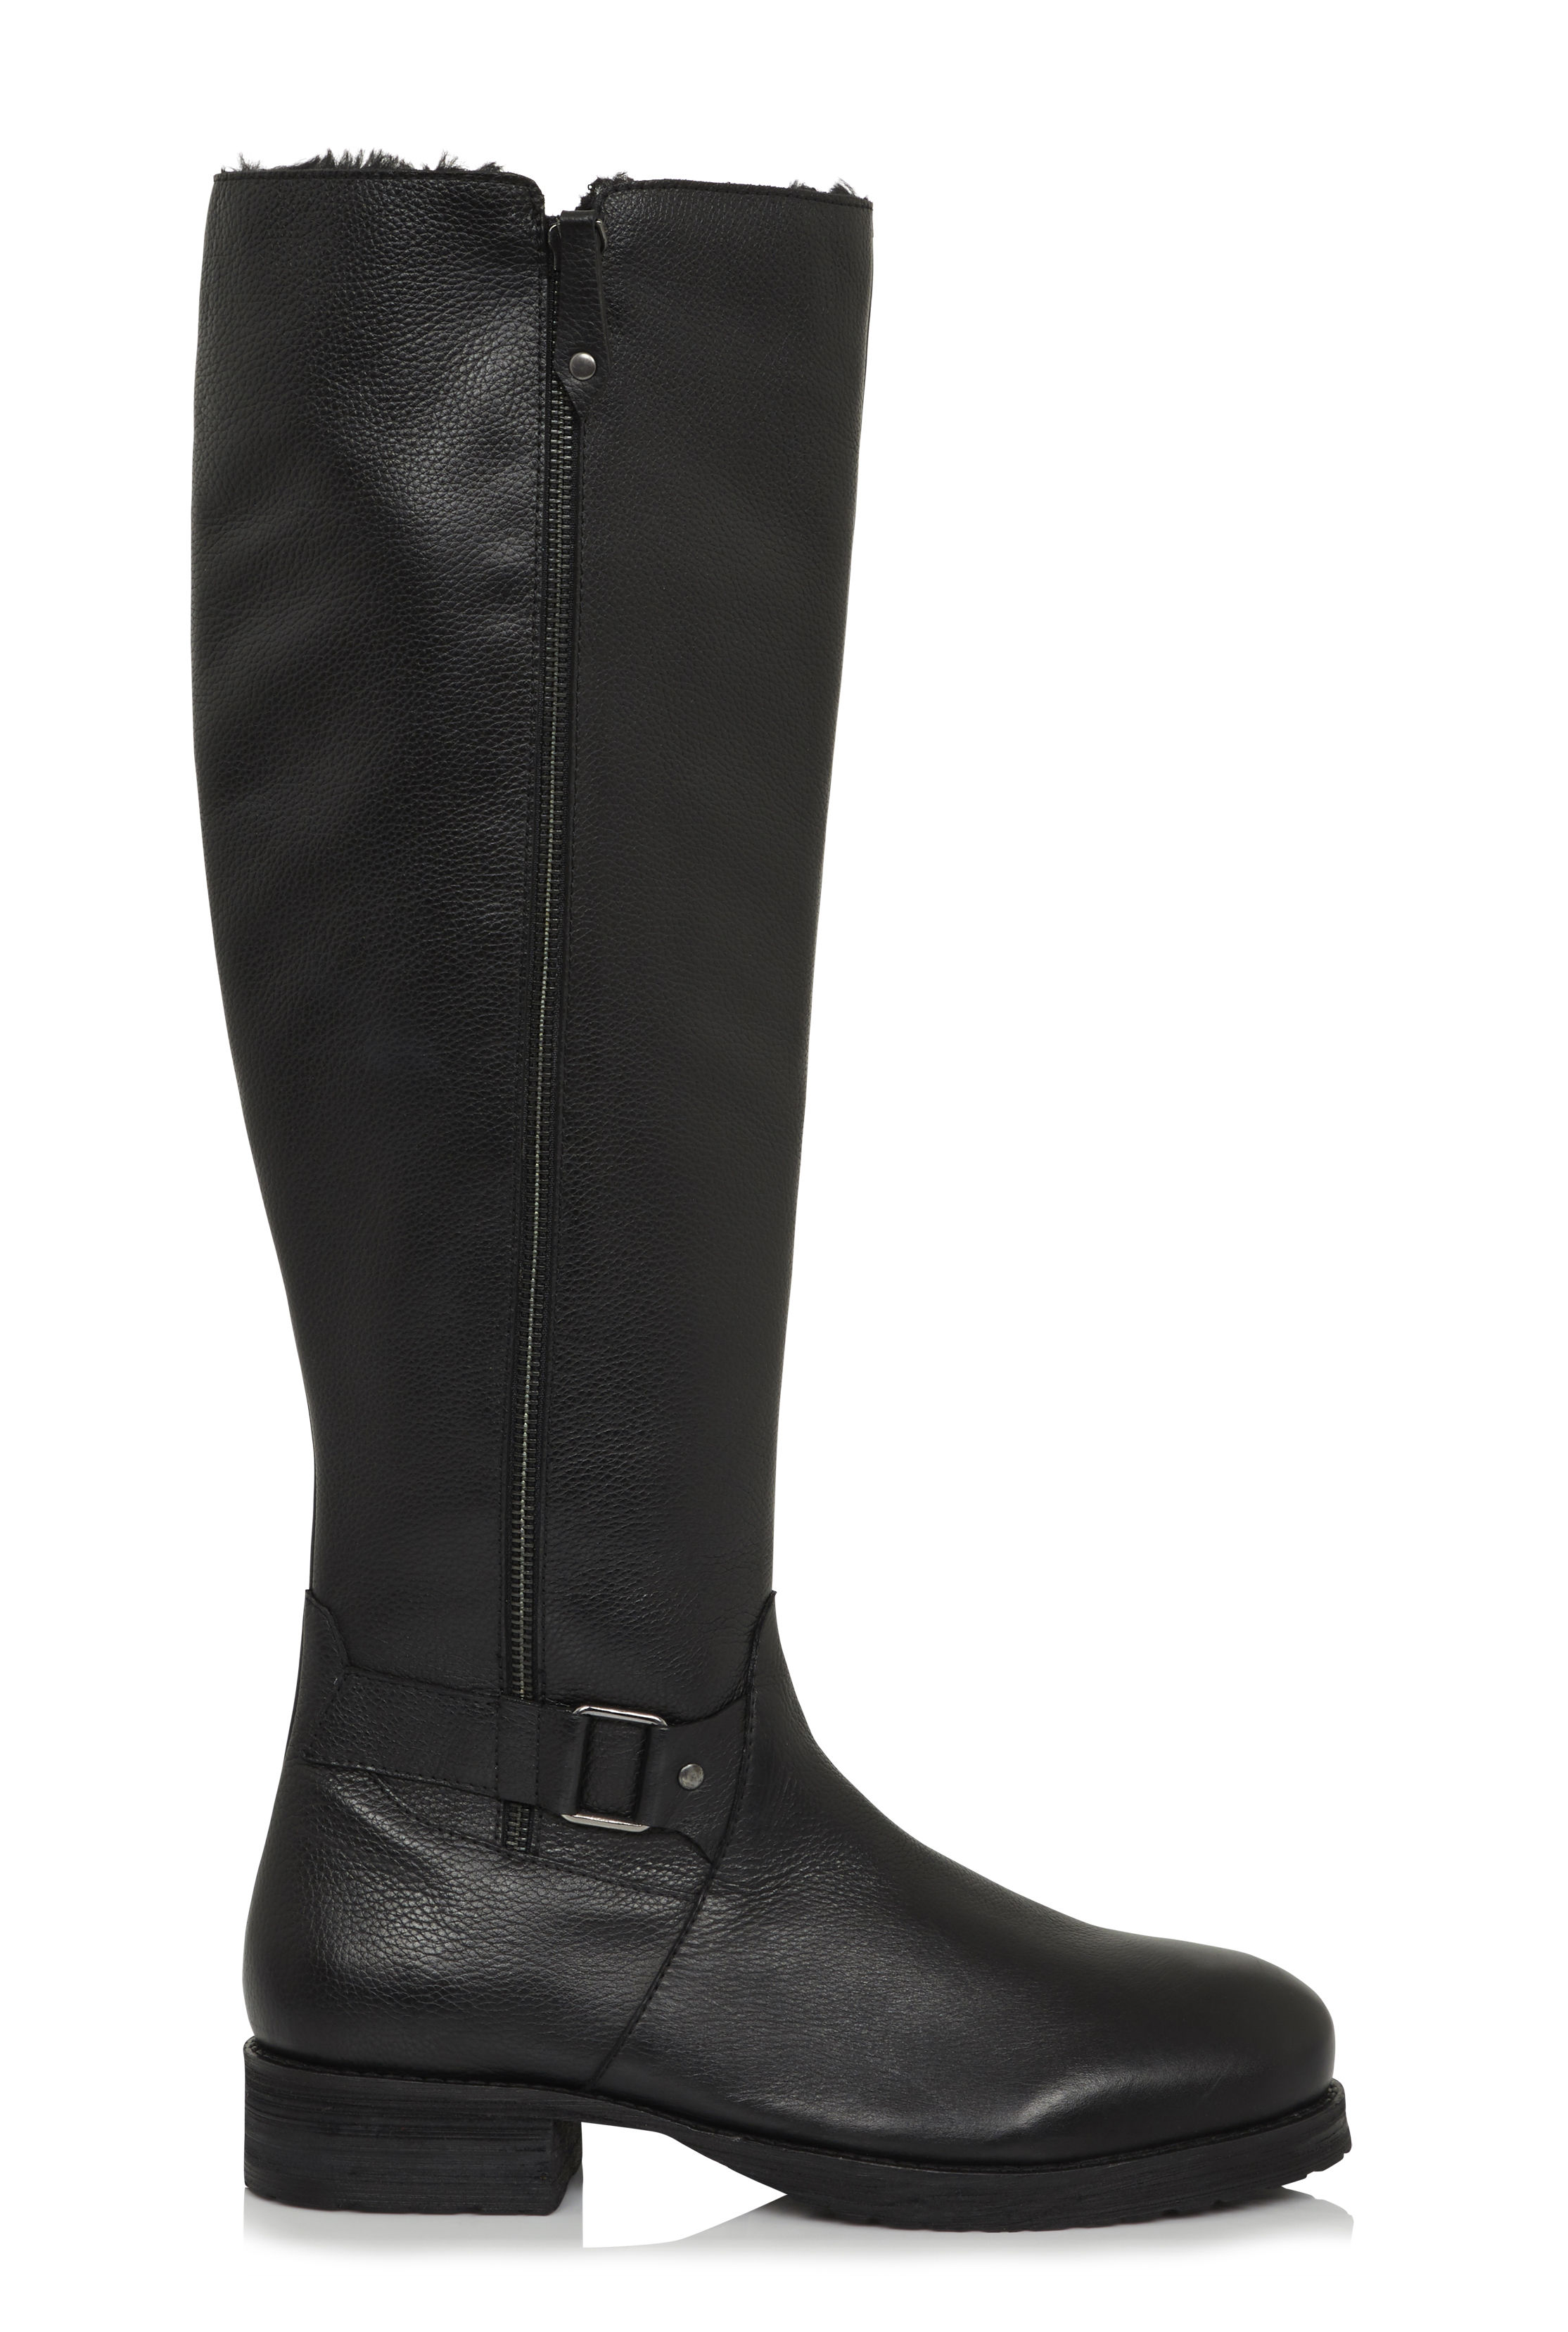 LTS Kaylee Faux Fur Trim Leather Tall Boot | Long Tall Sally